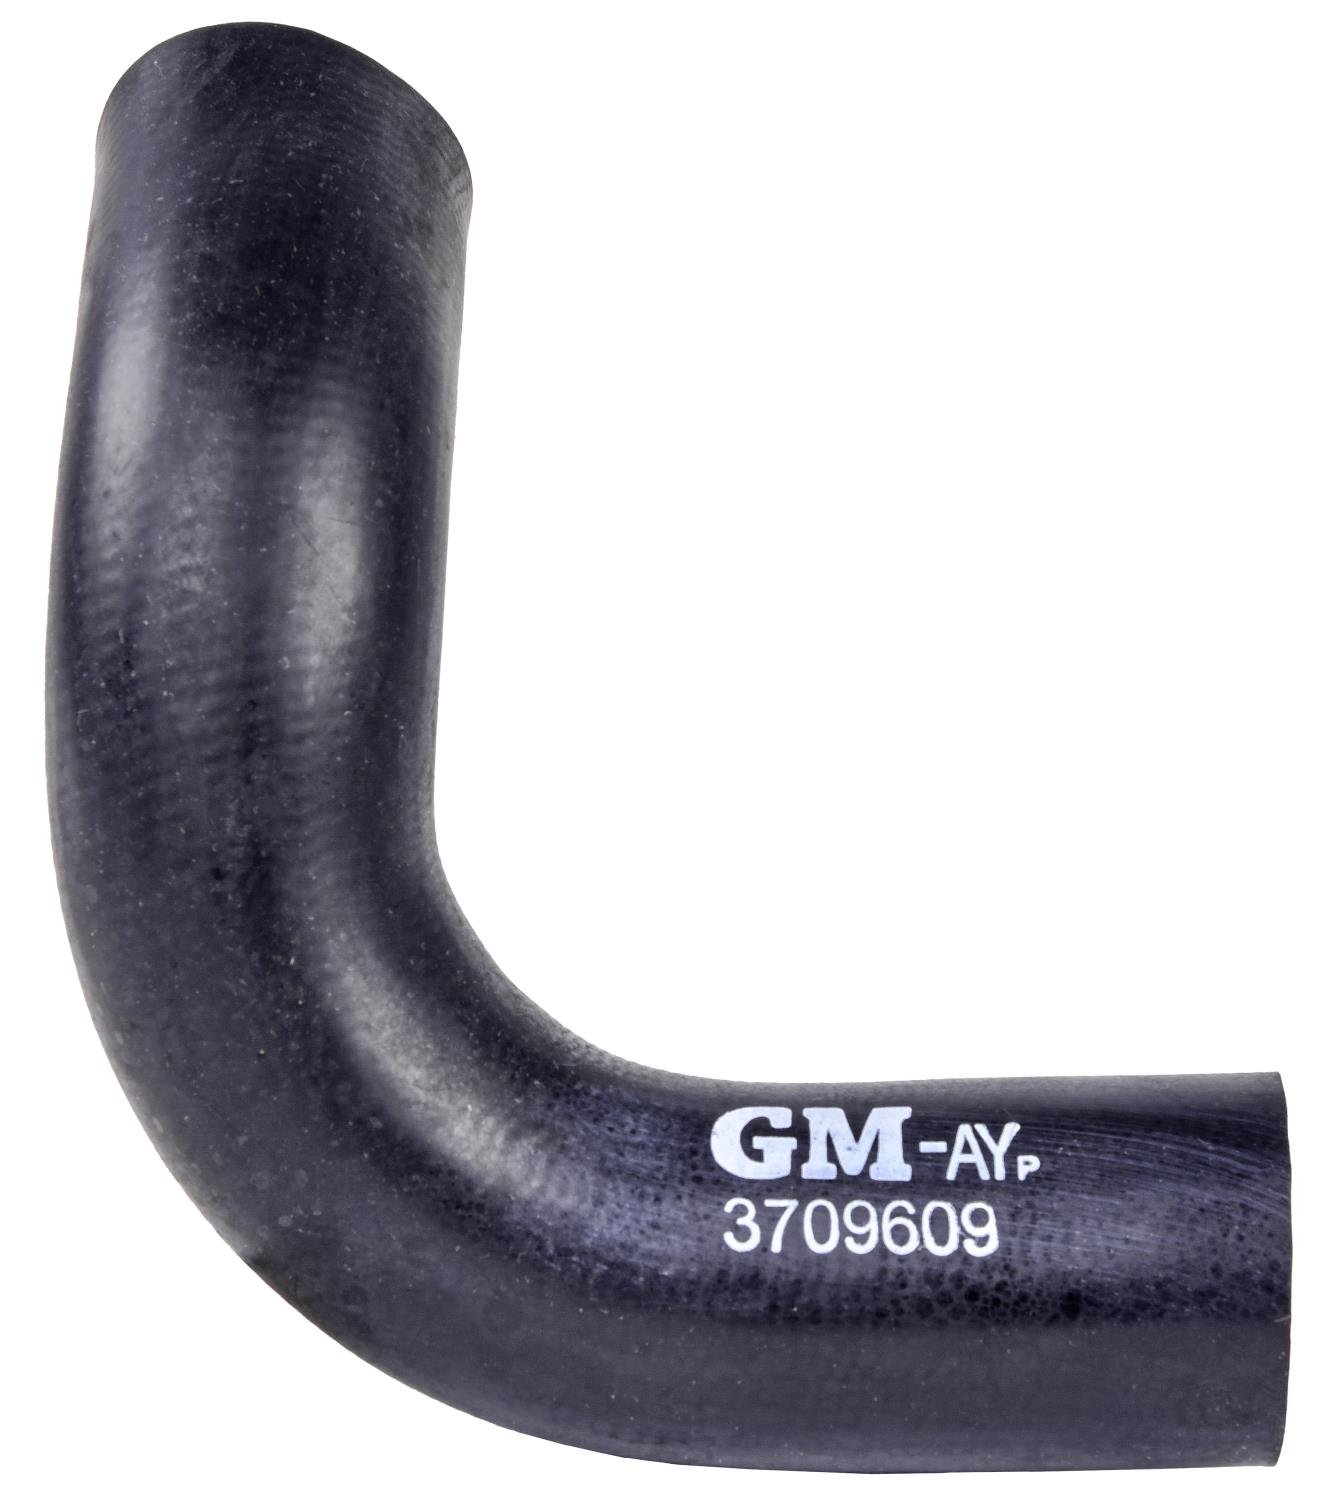 Lower Radiator Hose for 1955-1957 Chevrolet Fullsize [Direct-Fit Replacement for GM 3709609]